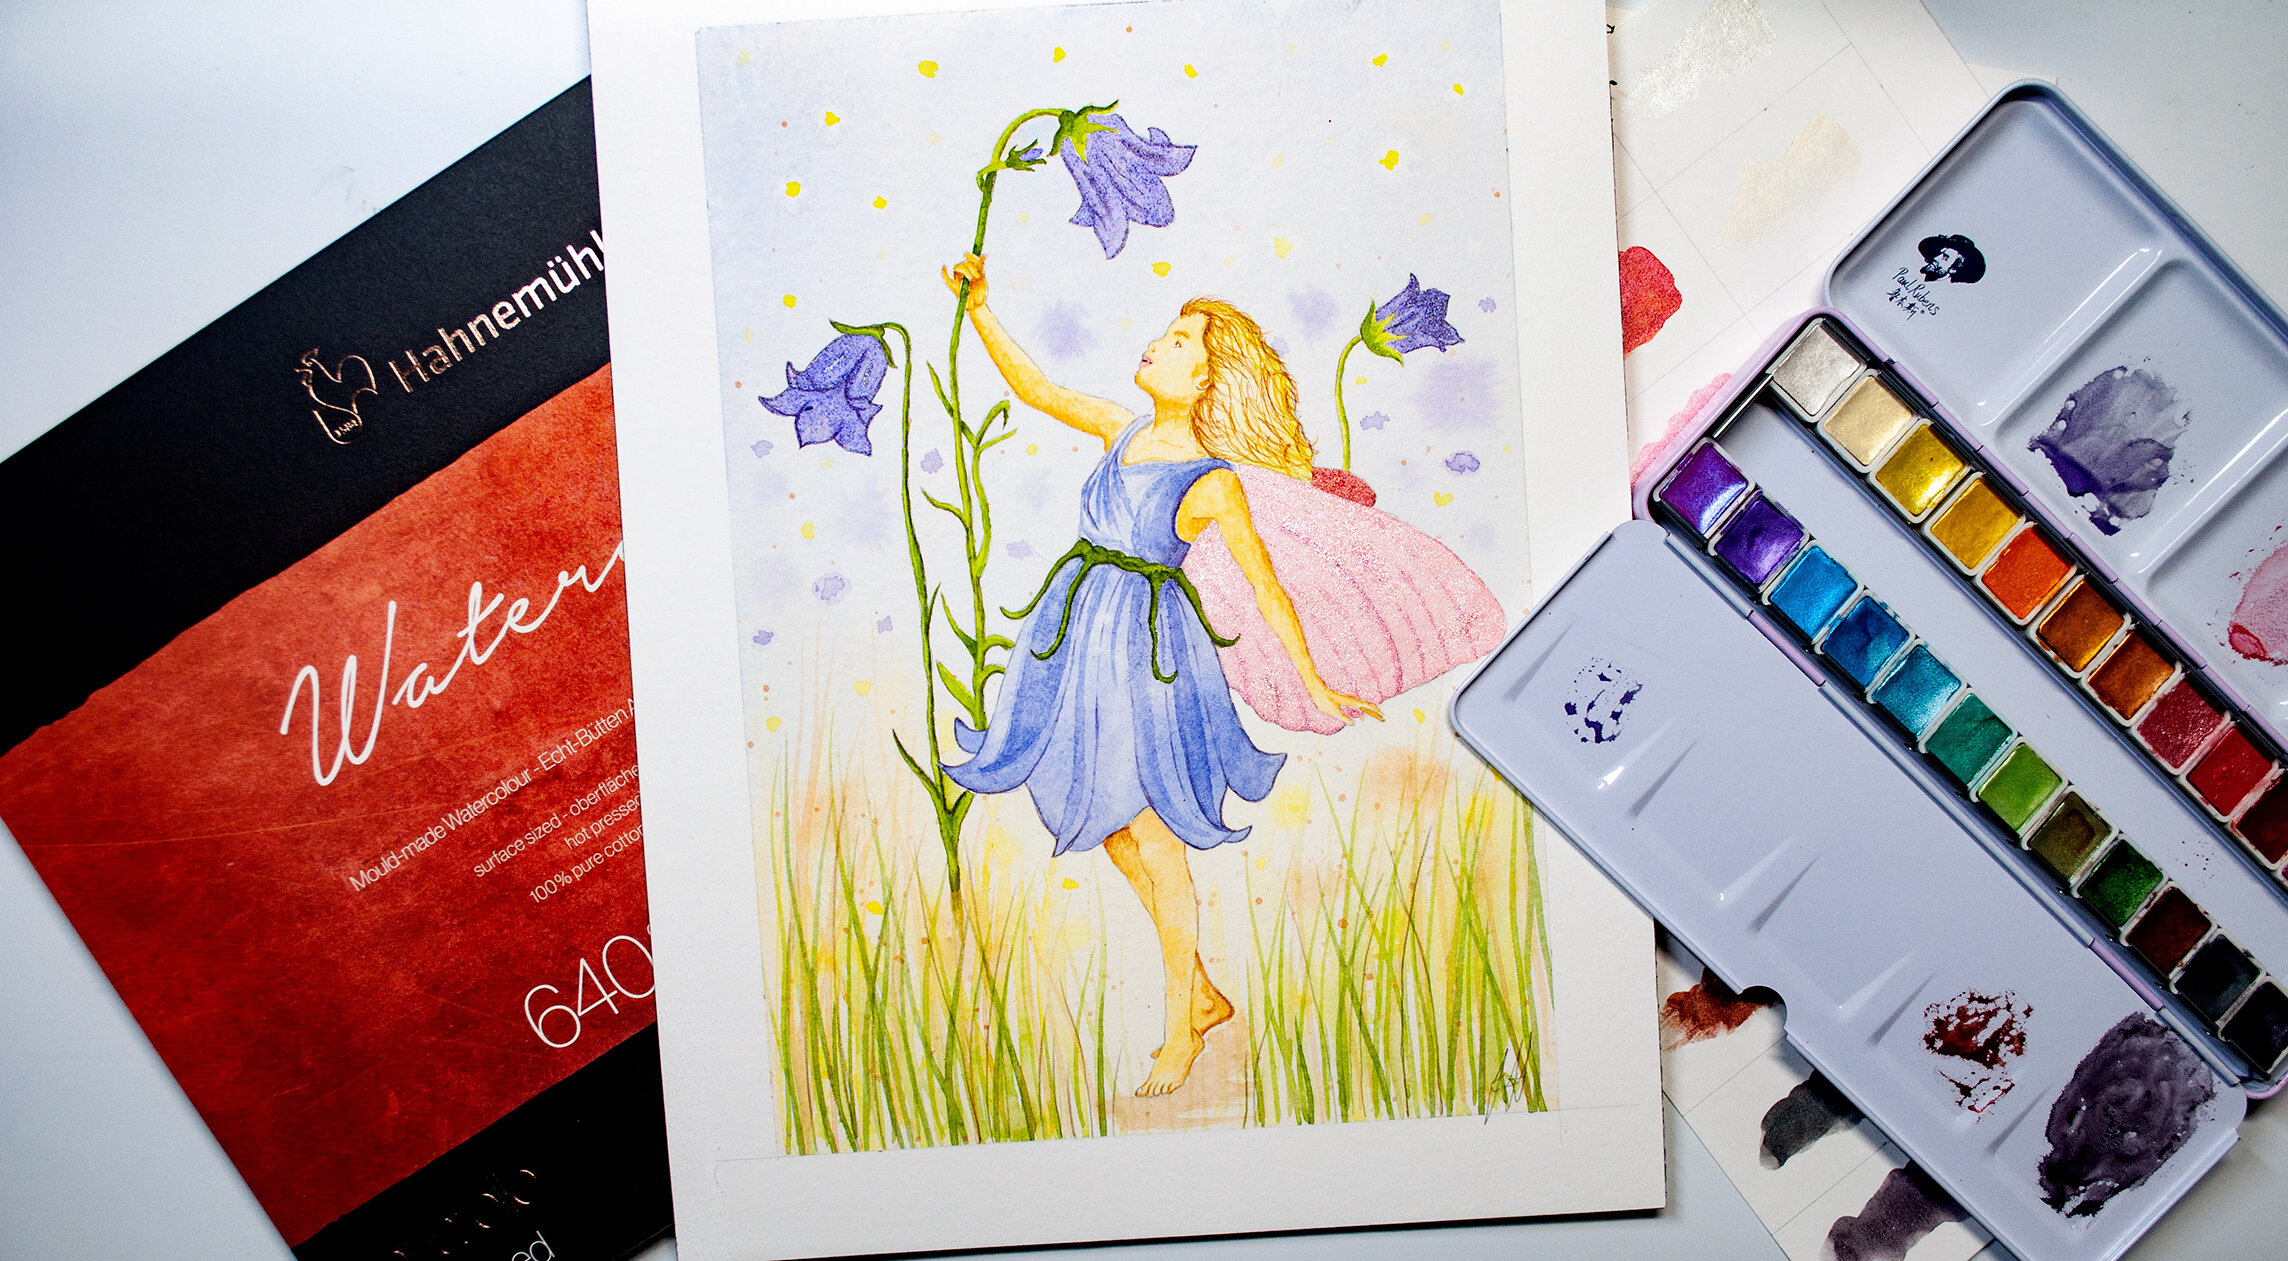 Love Them or Hate Them? Paul Rubens Watercolors Review - The Painted Pen